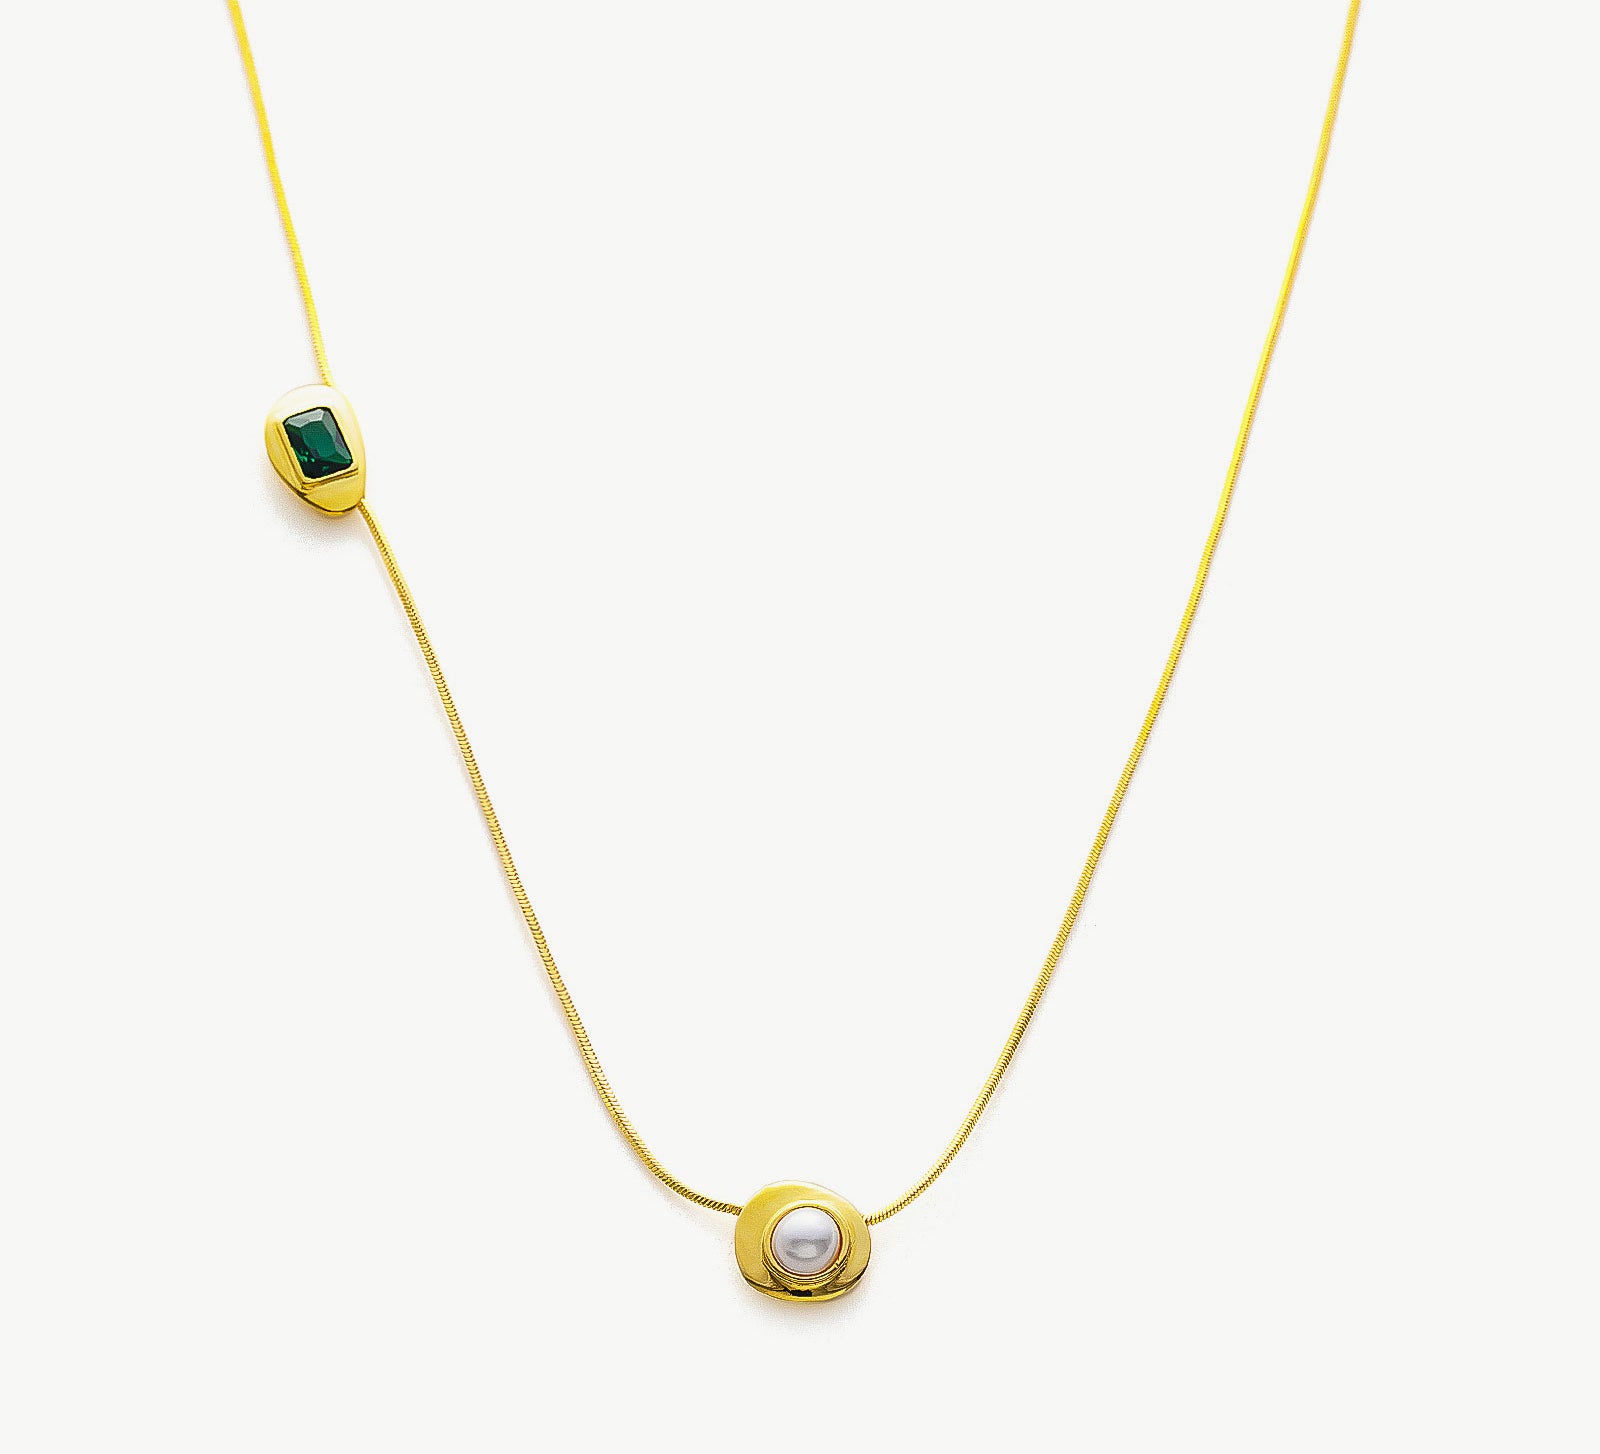 Gold Crystal Drop Necklace with a captivating emerald crystal pendant, showcasing an elegant and radiant design on a golden chain, adding a touch of glamour and sophistication to your ensemble.